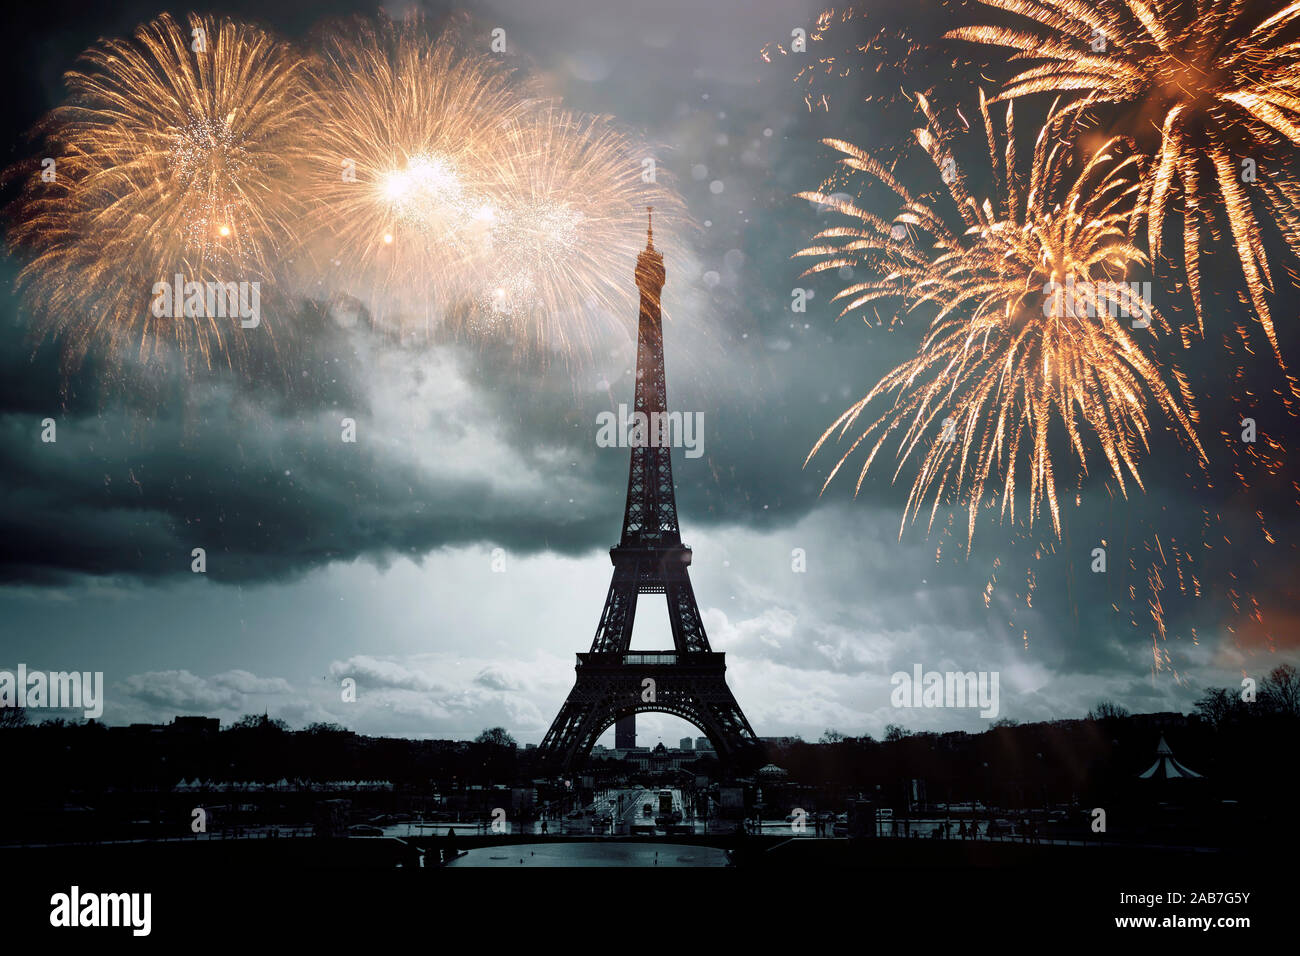 Eiffel tower with fireworks, celebration of the New Year in Paris, France Stock Photo